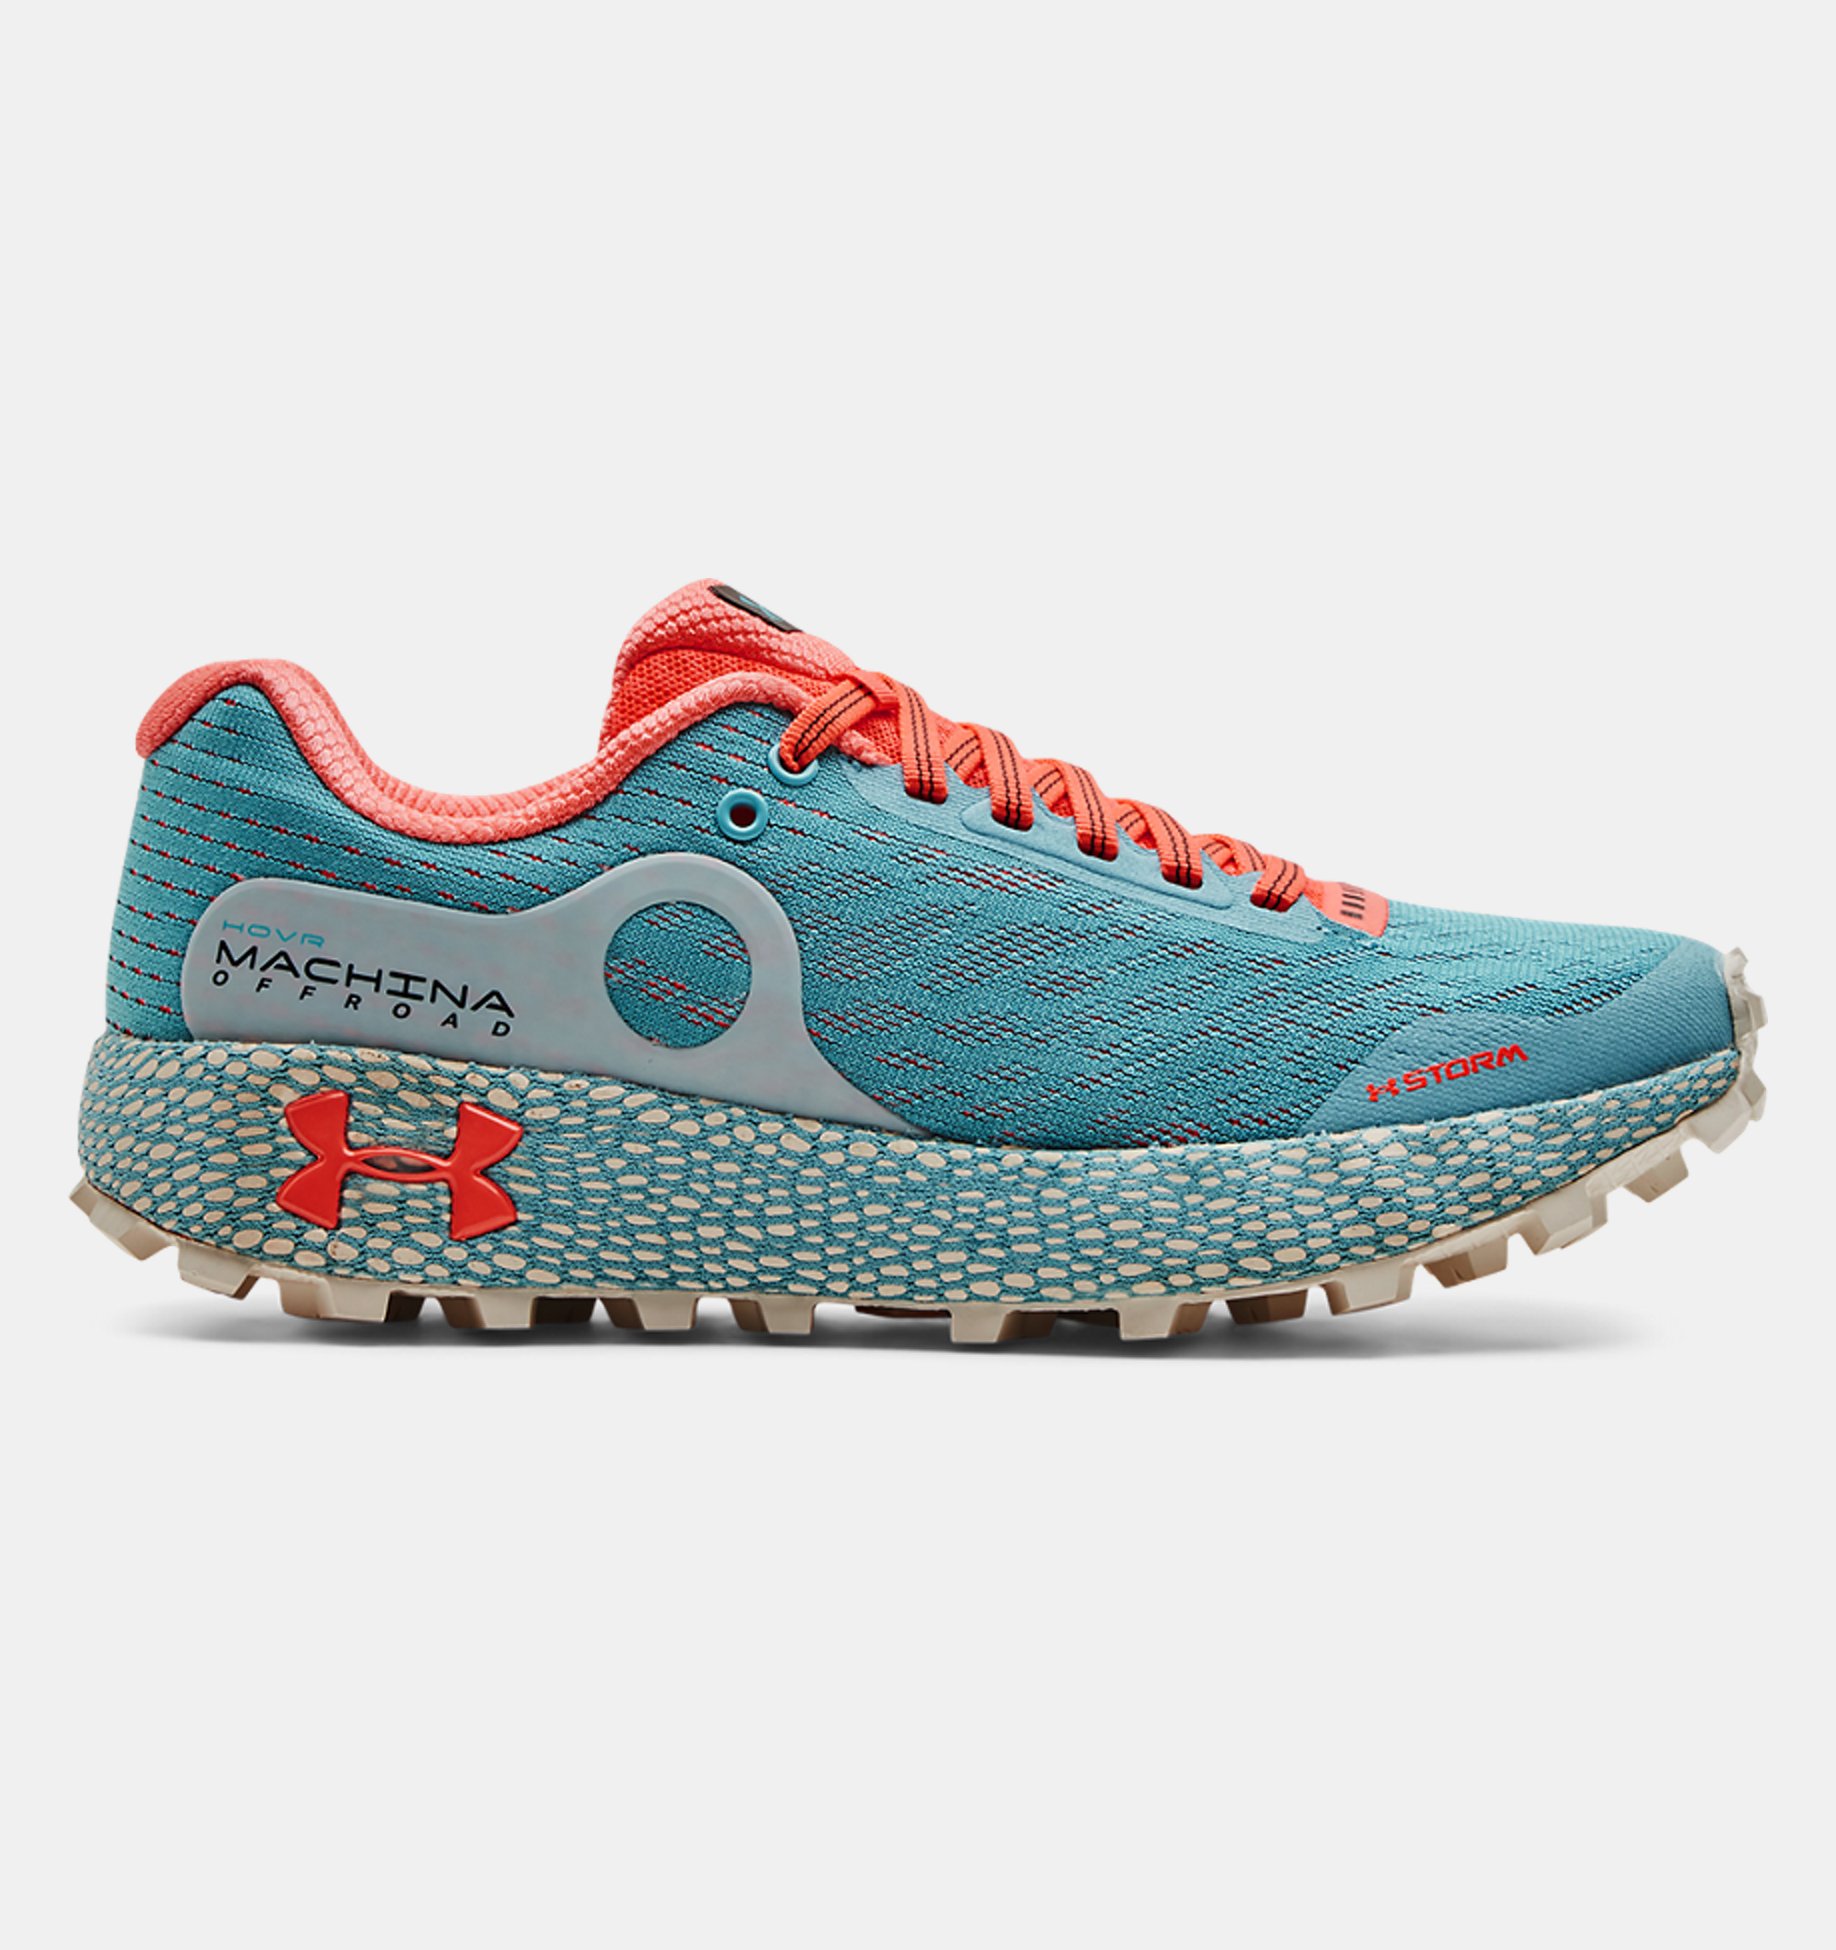 Under Armour Womens HOVR Machina Off Road Trail Running Shoes Trainers Sneakers 